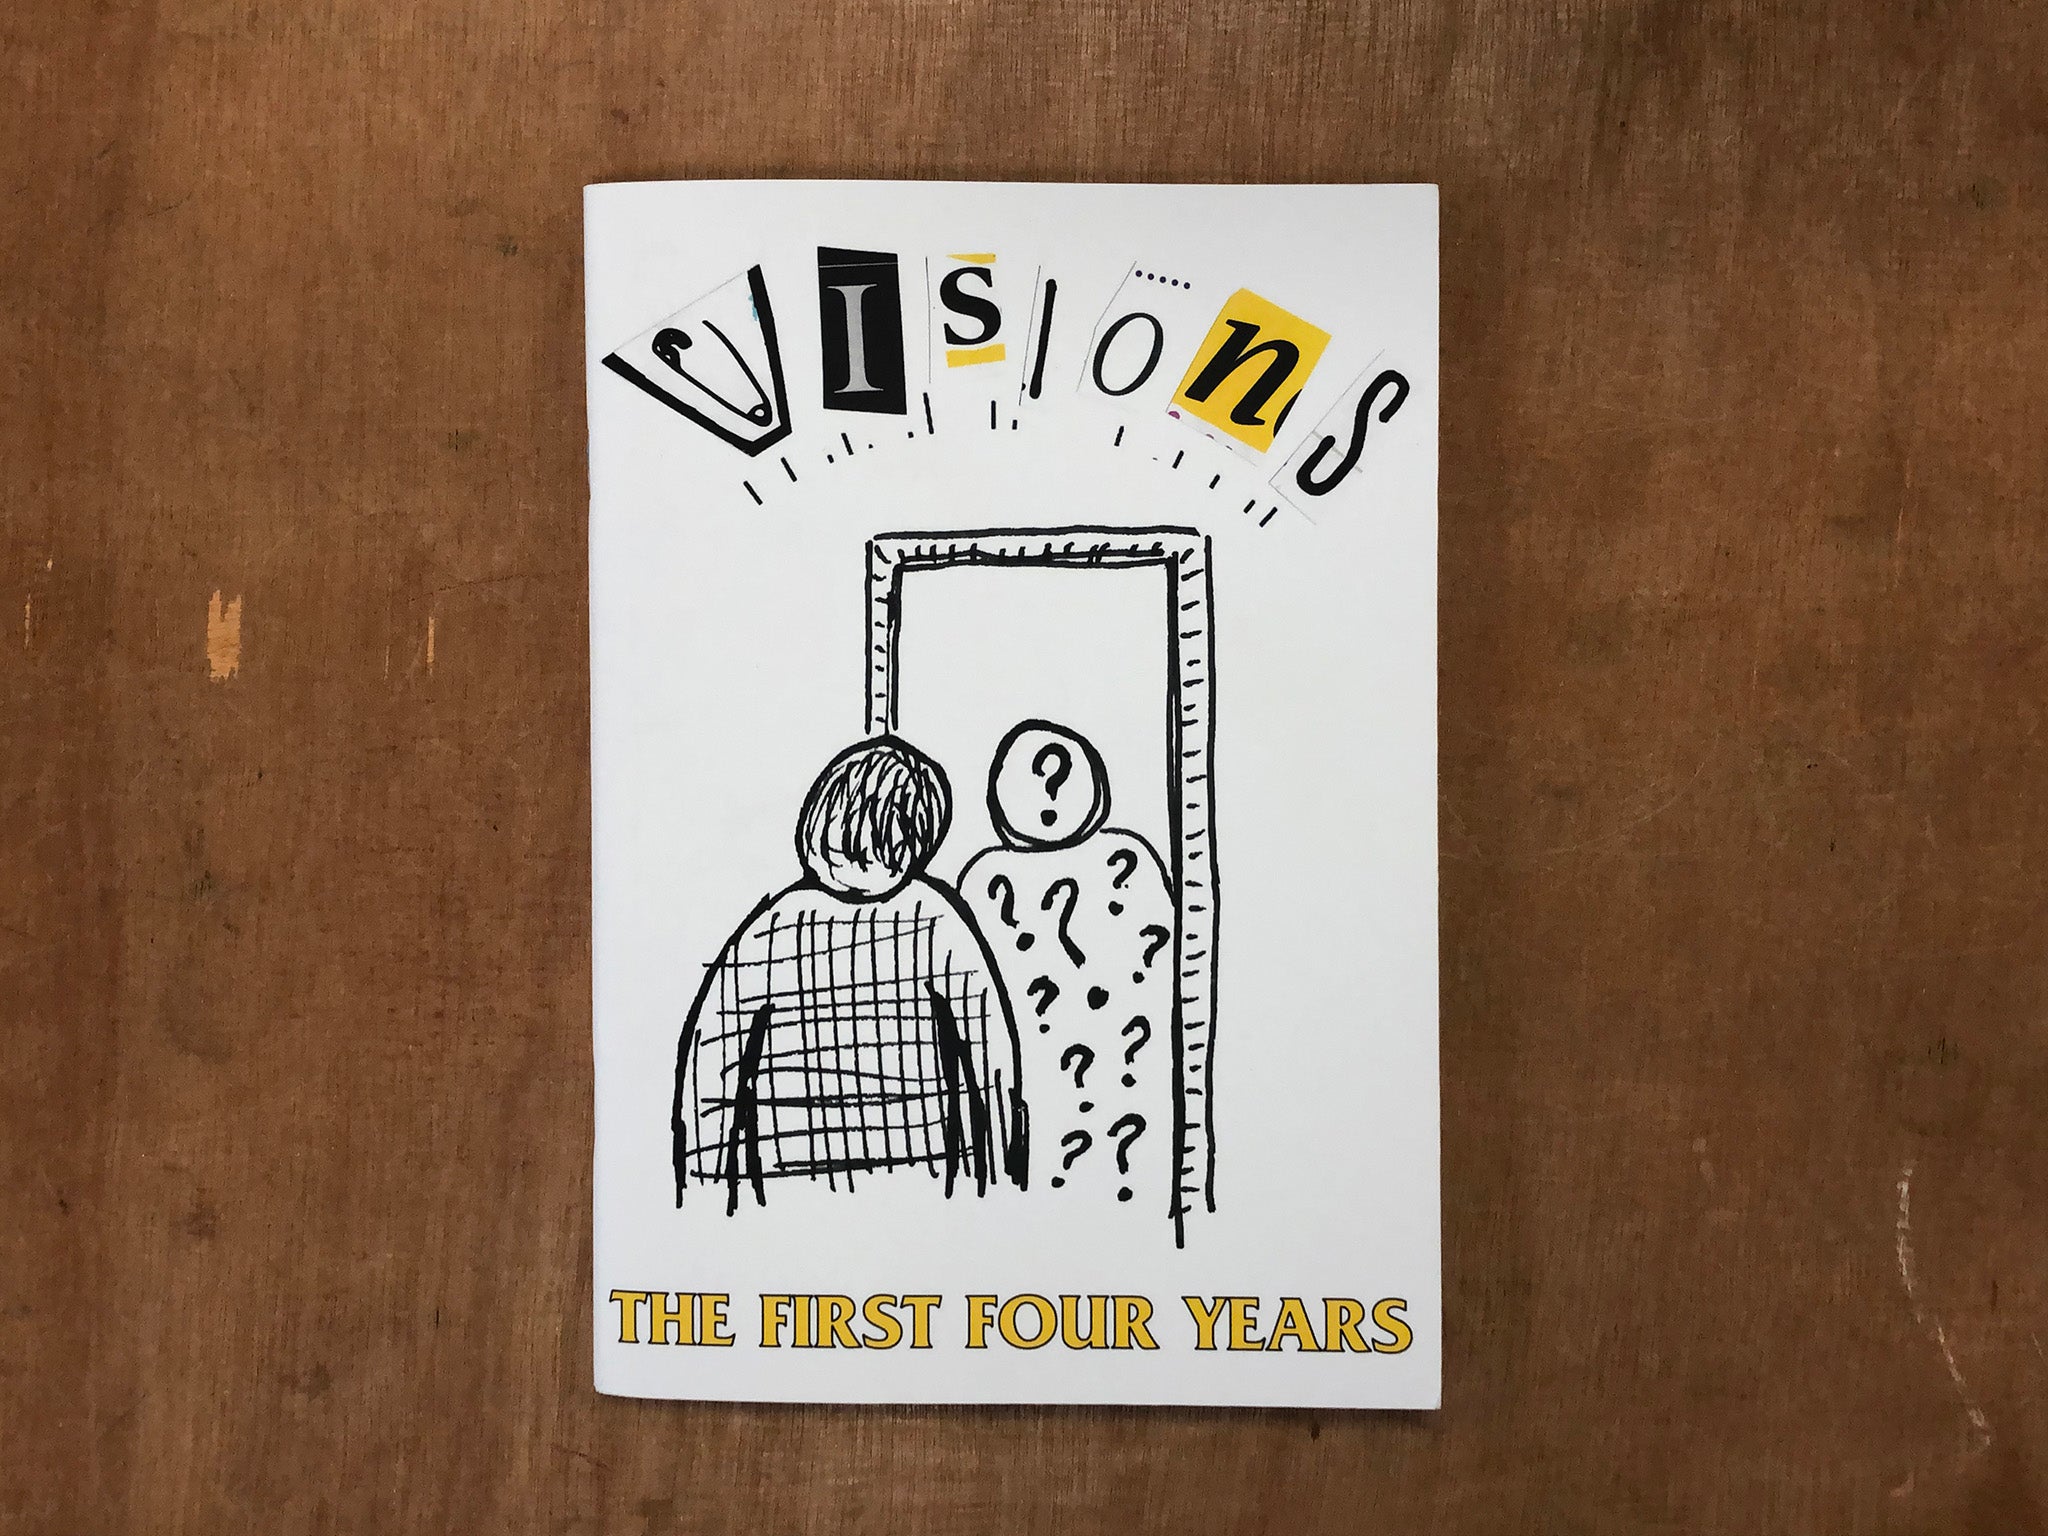 VISIONS, THE FIRST FOUR YEARS by Dave Emmerson